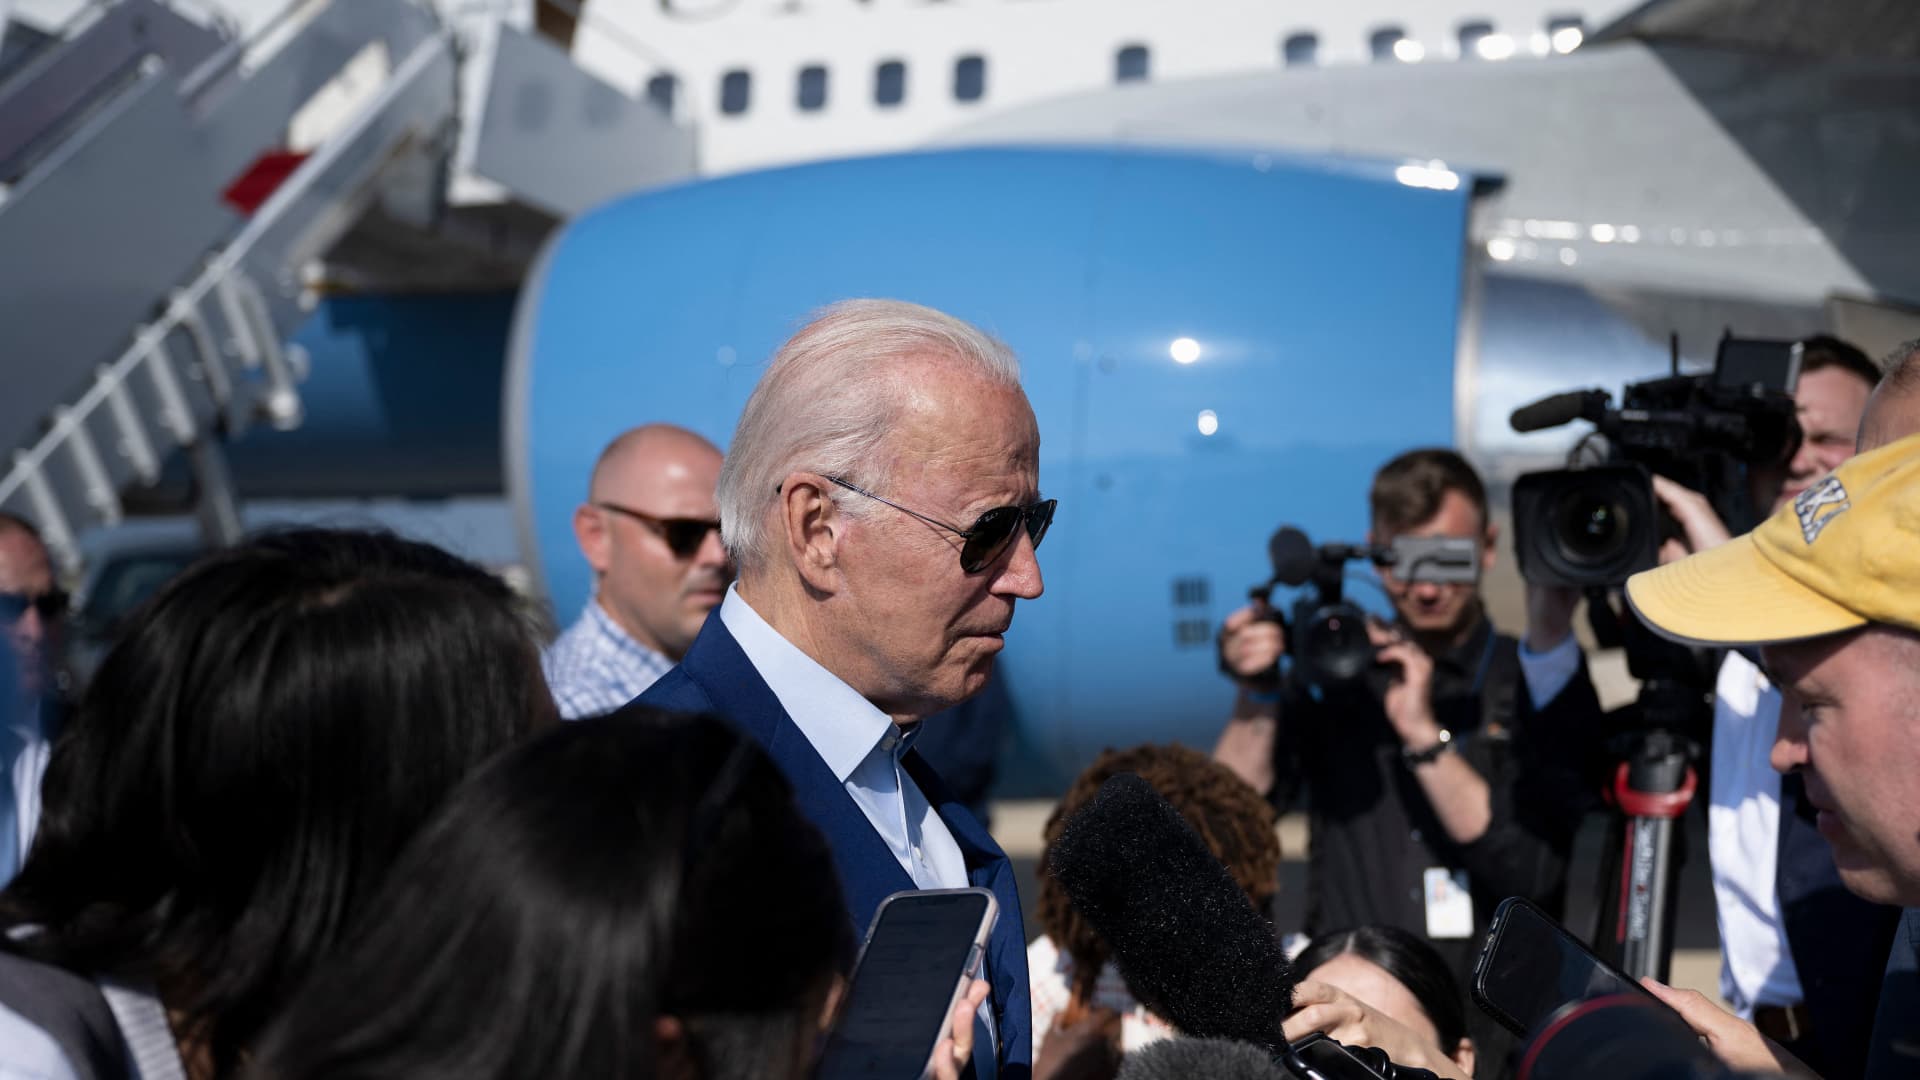 Biden says he expects to speak with China’s Xi in